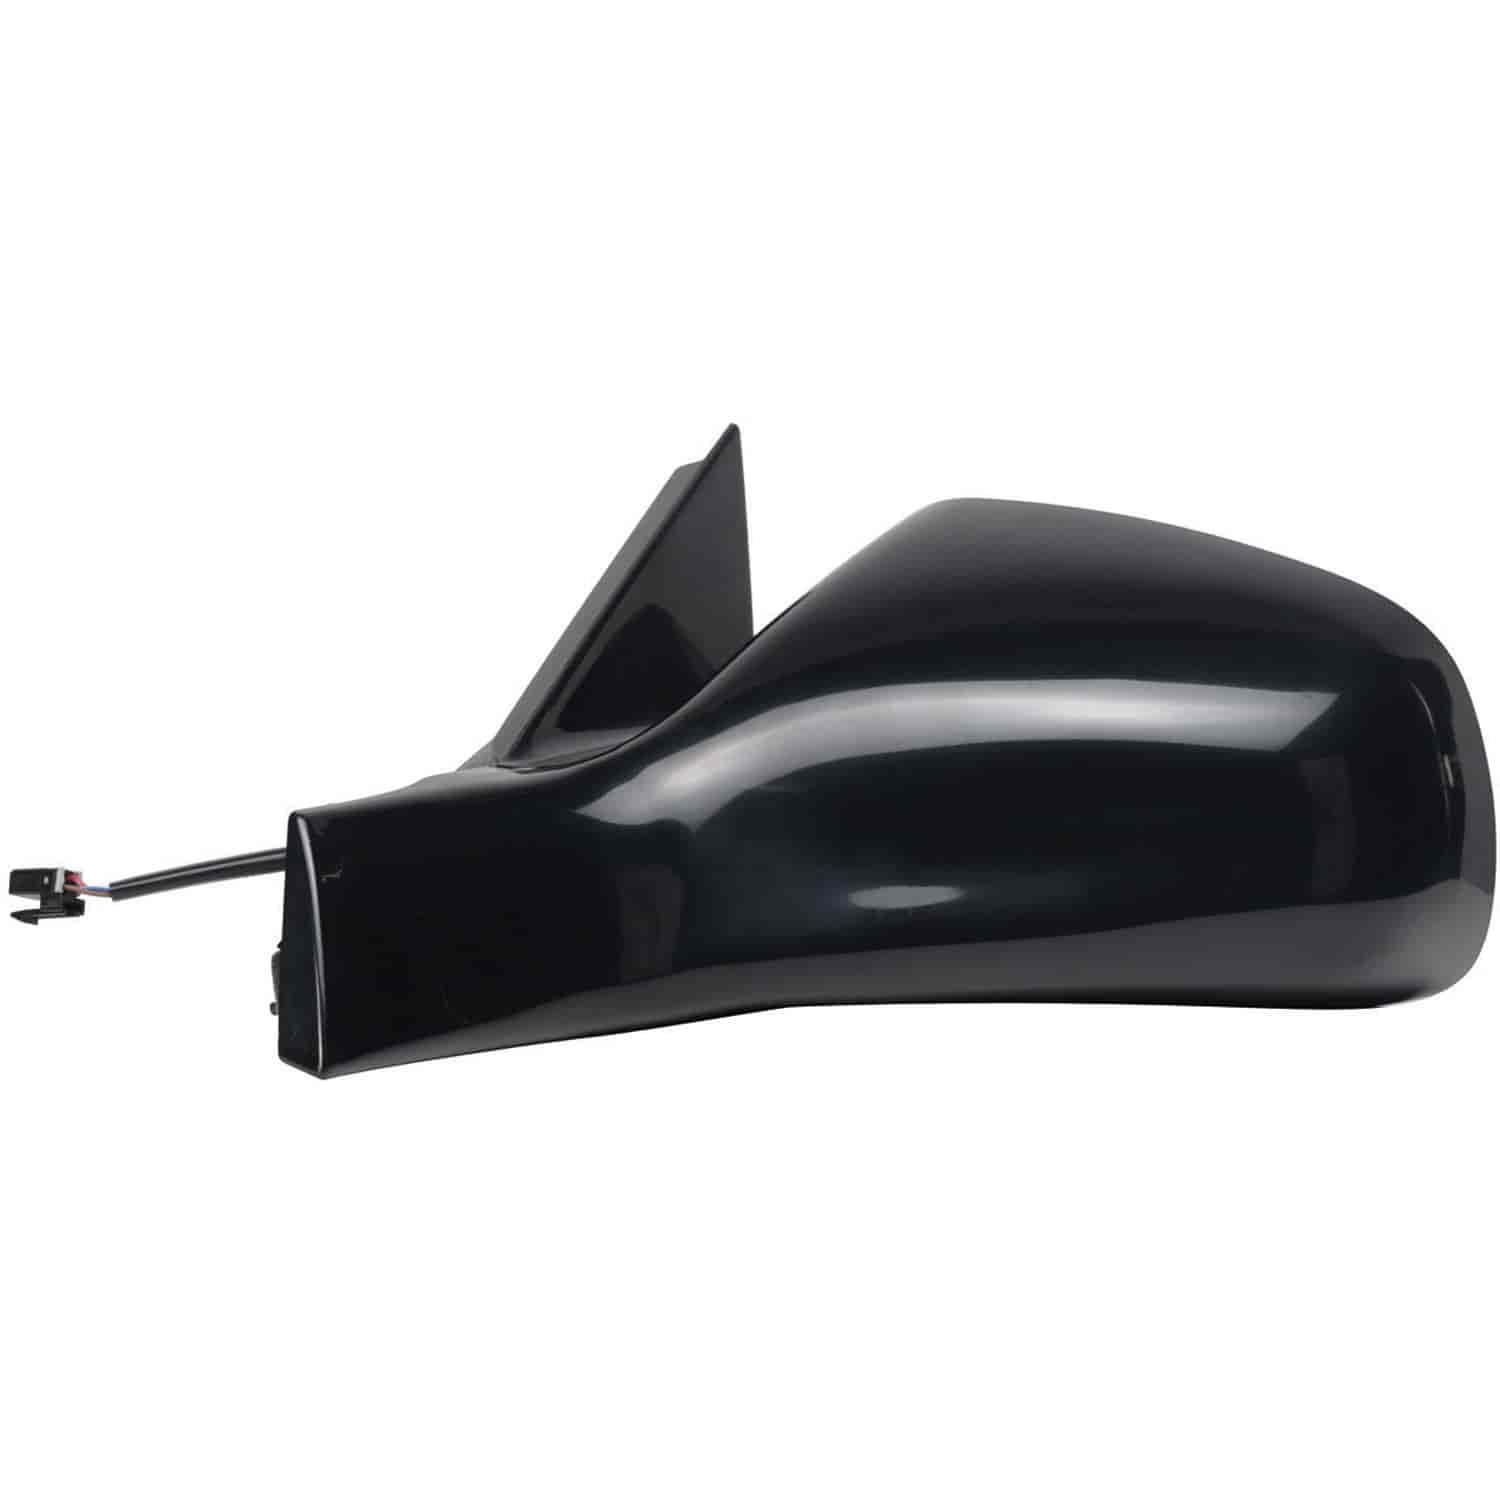 OEM Style Replacement mirror for 04-08 Pontiac Grand Prix driver side mirror tested to fit and funct